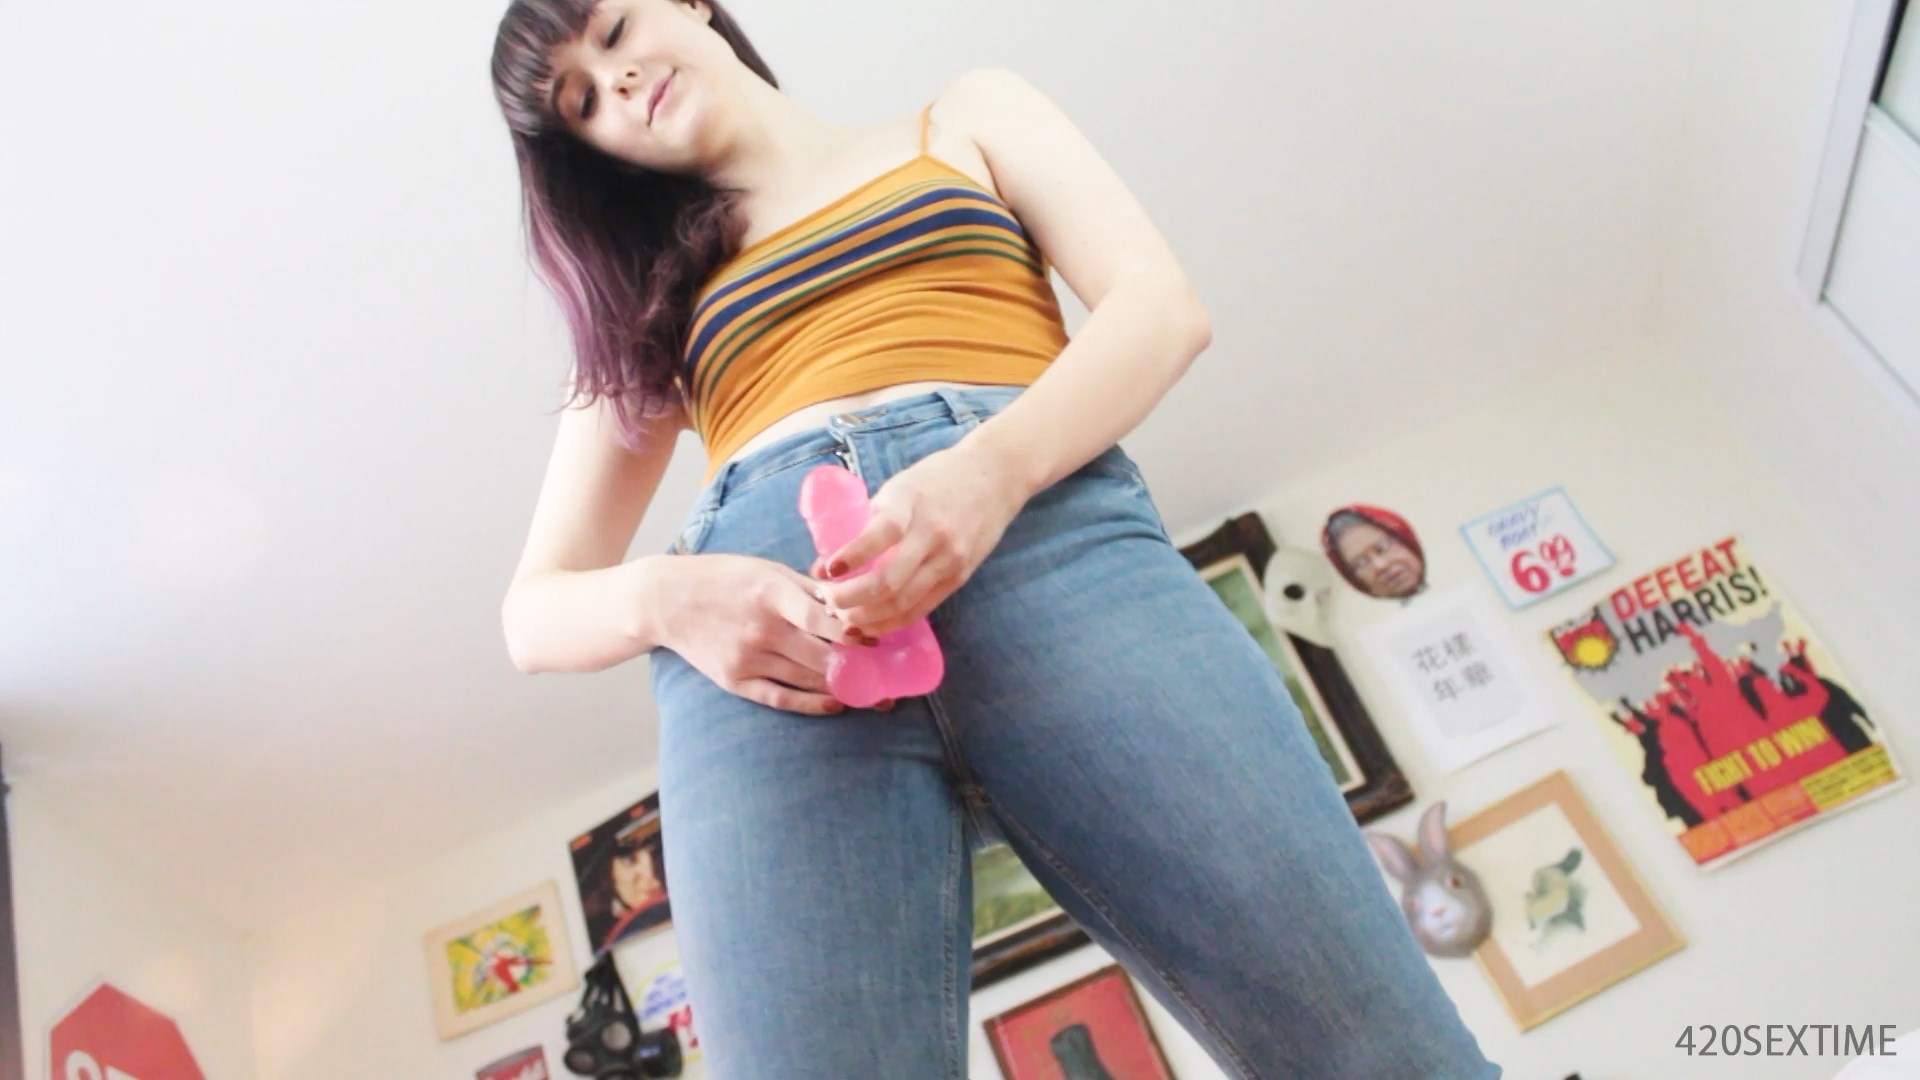 420sextime - Suck My Hot Pink Cock You Pathetic Loser